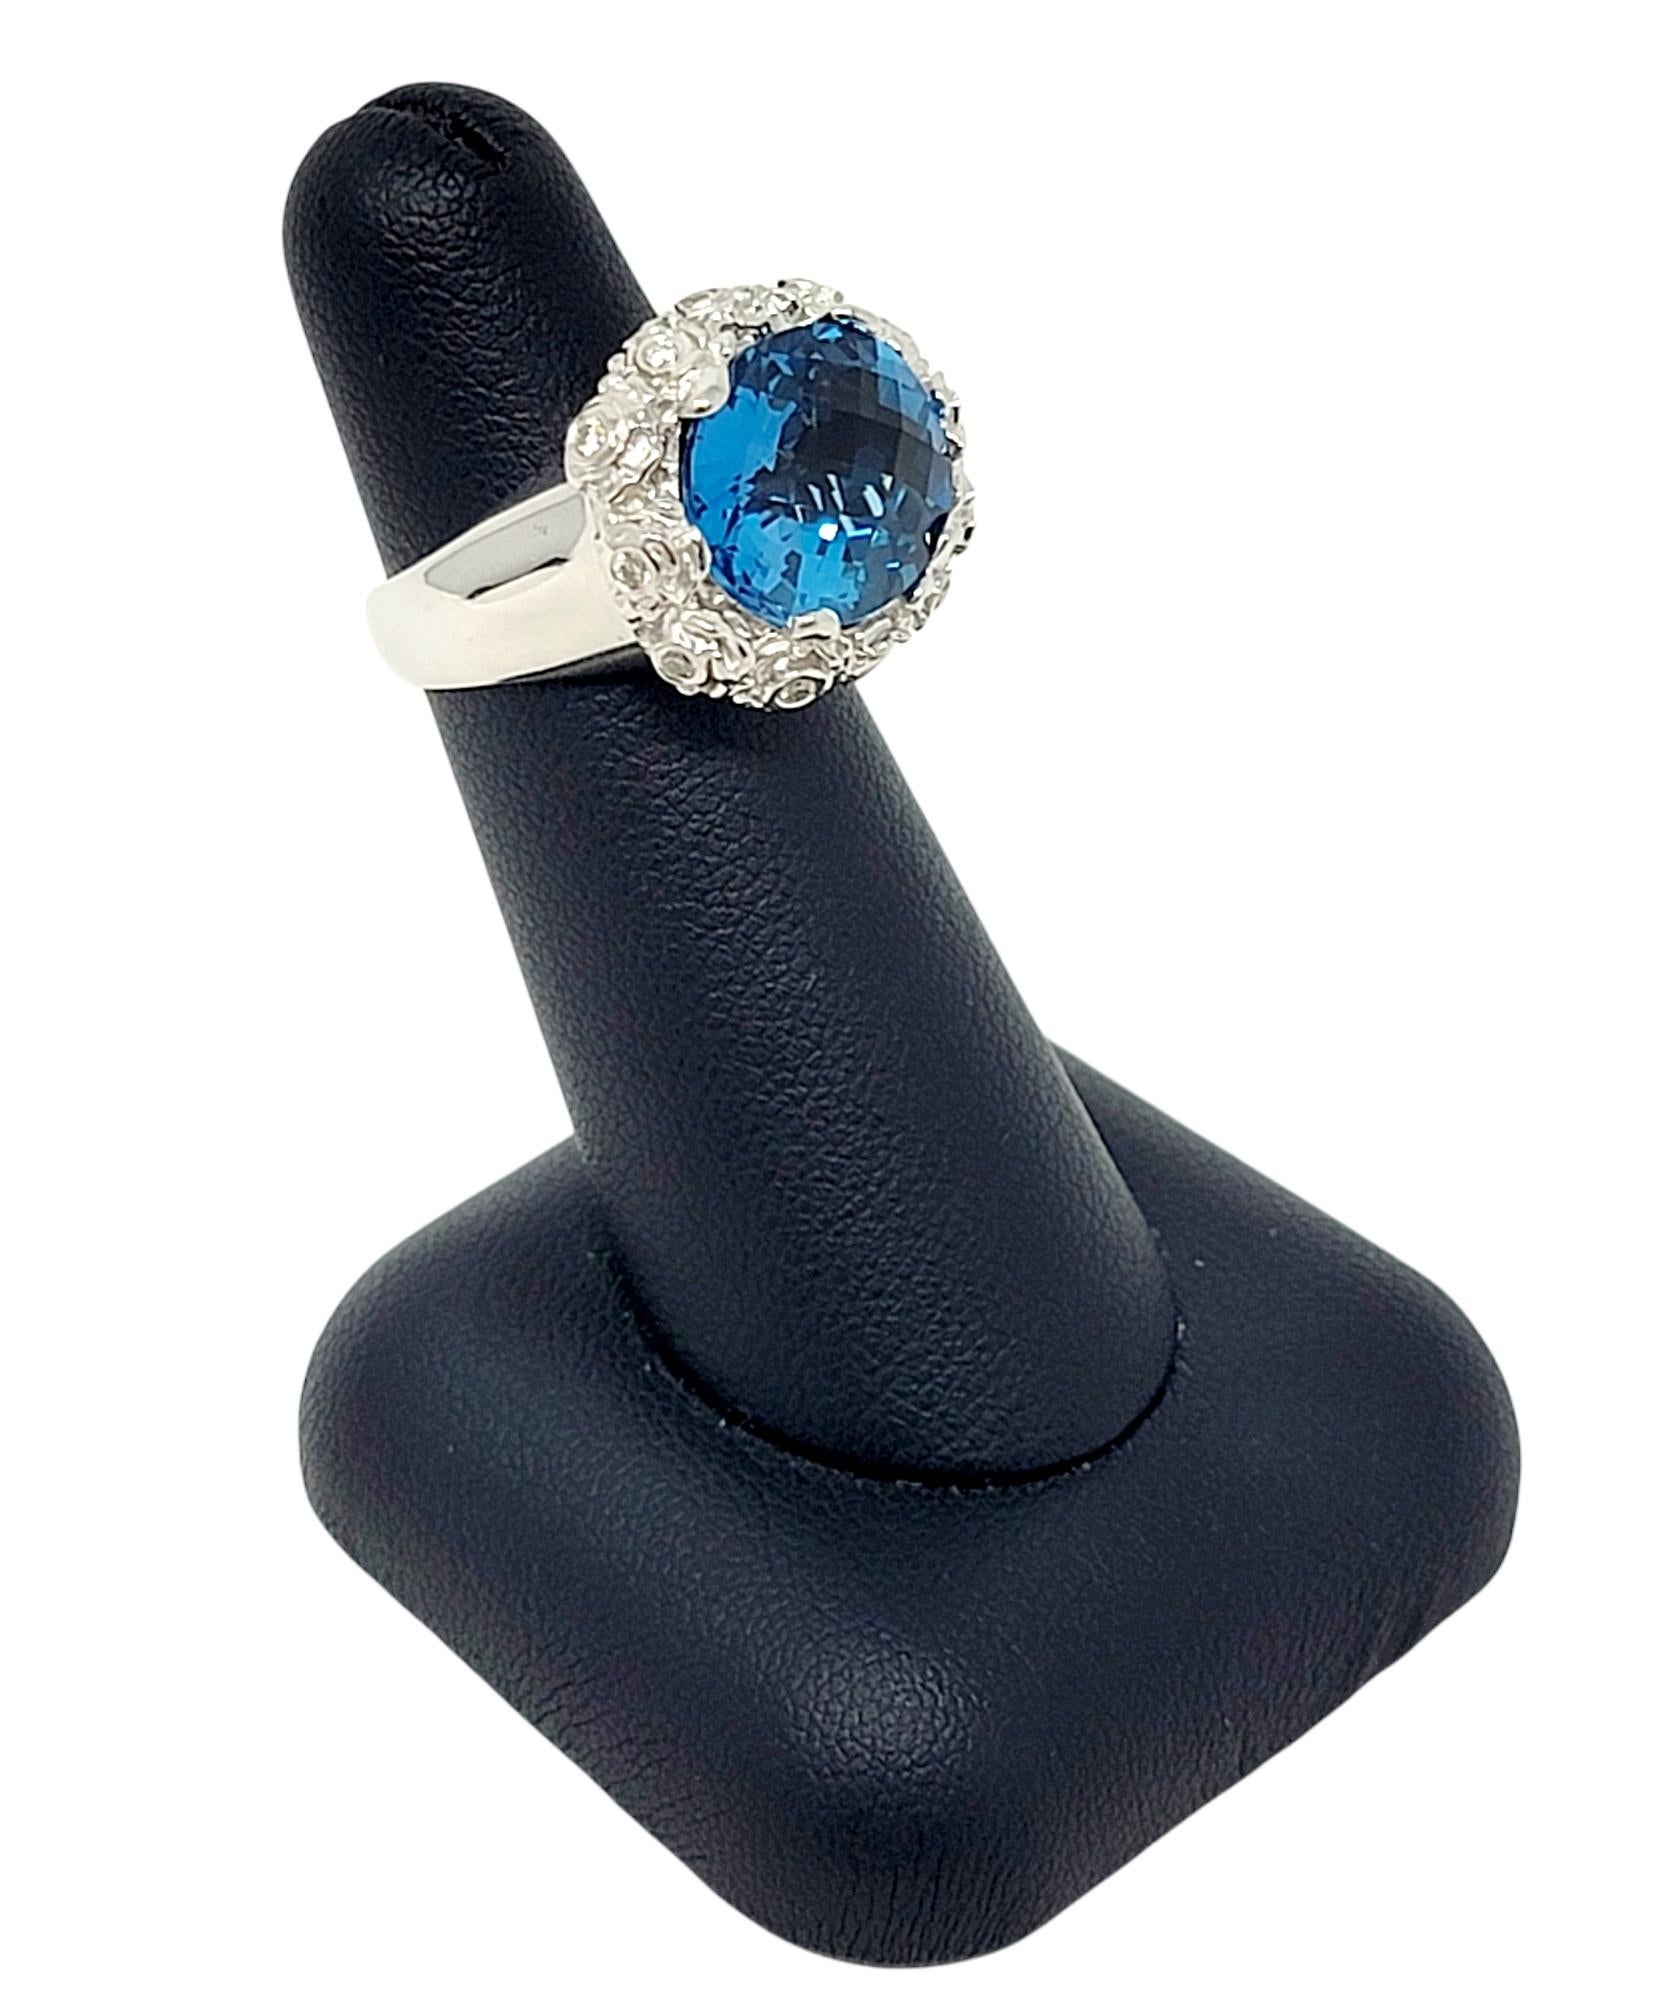 9.75 Carat Total Oval Checkerboard Cut Blue Topaz and Diamond Ring 18 Karat Gold For Sale 1